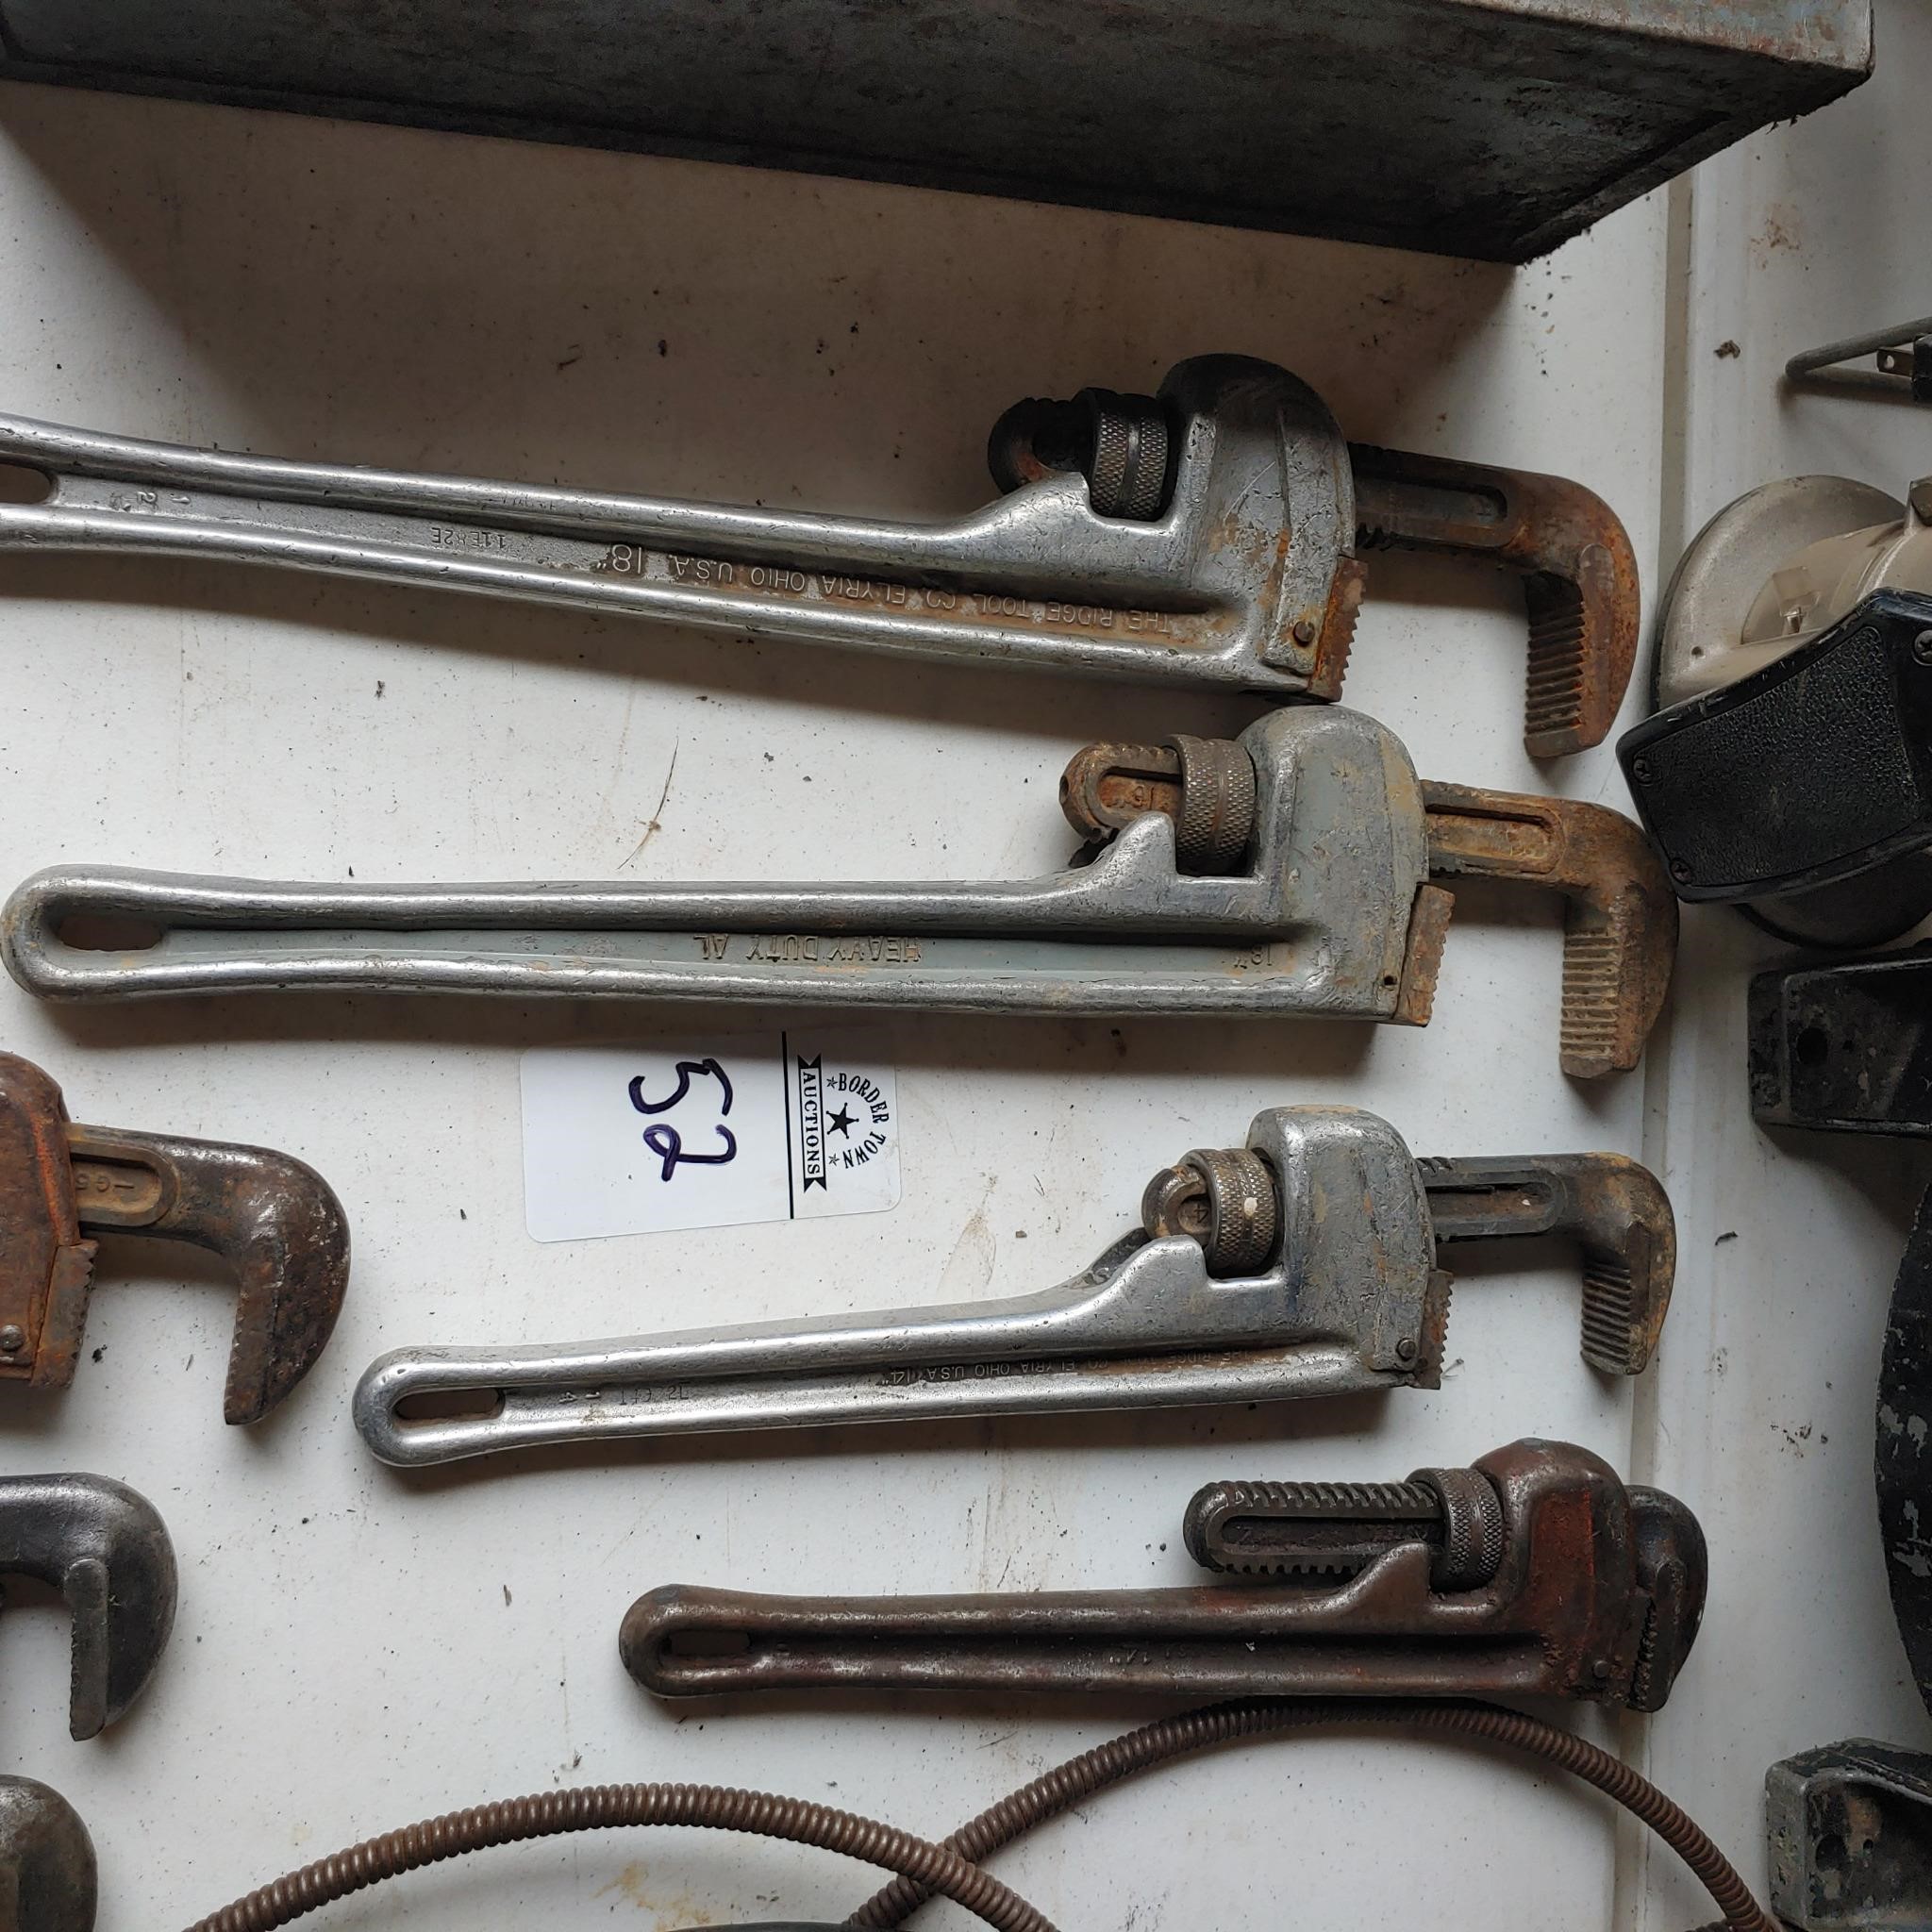 4 PIPE WRENCHES